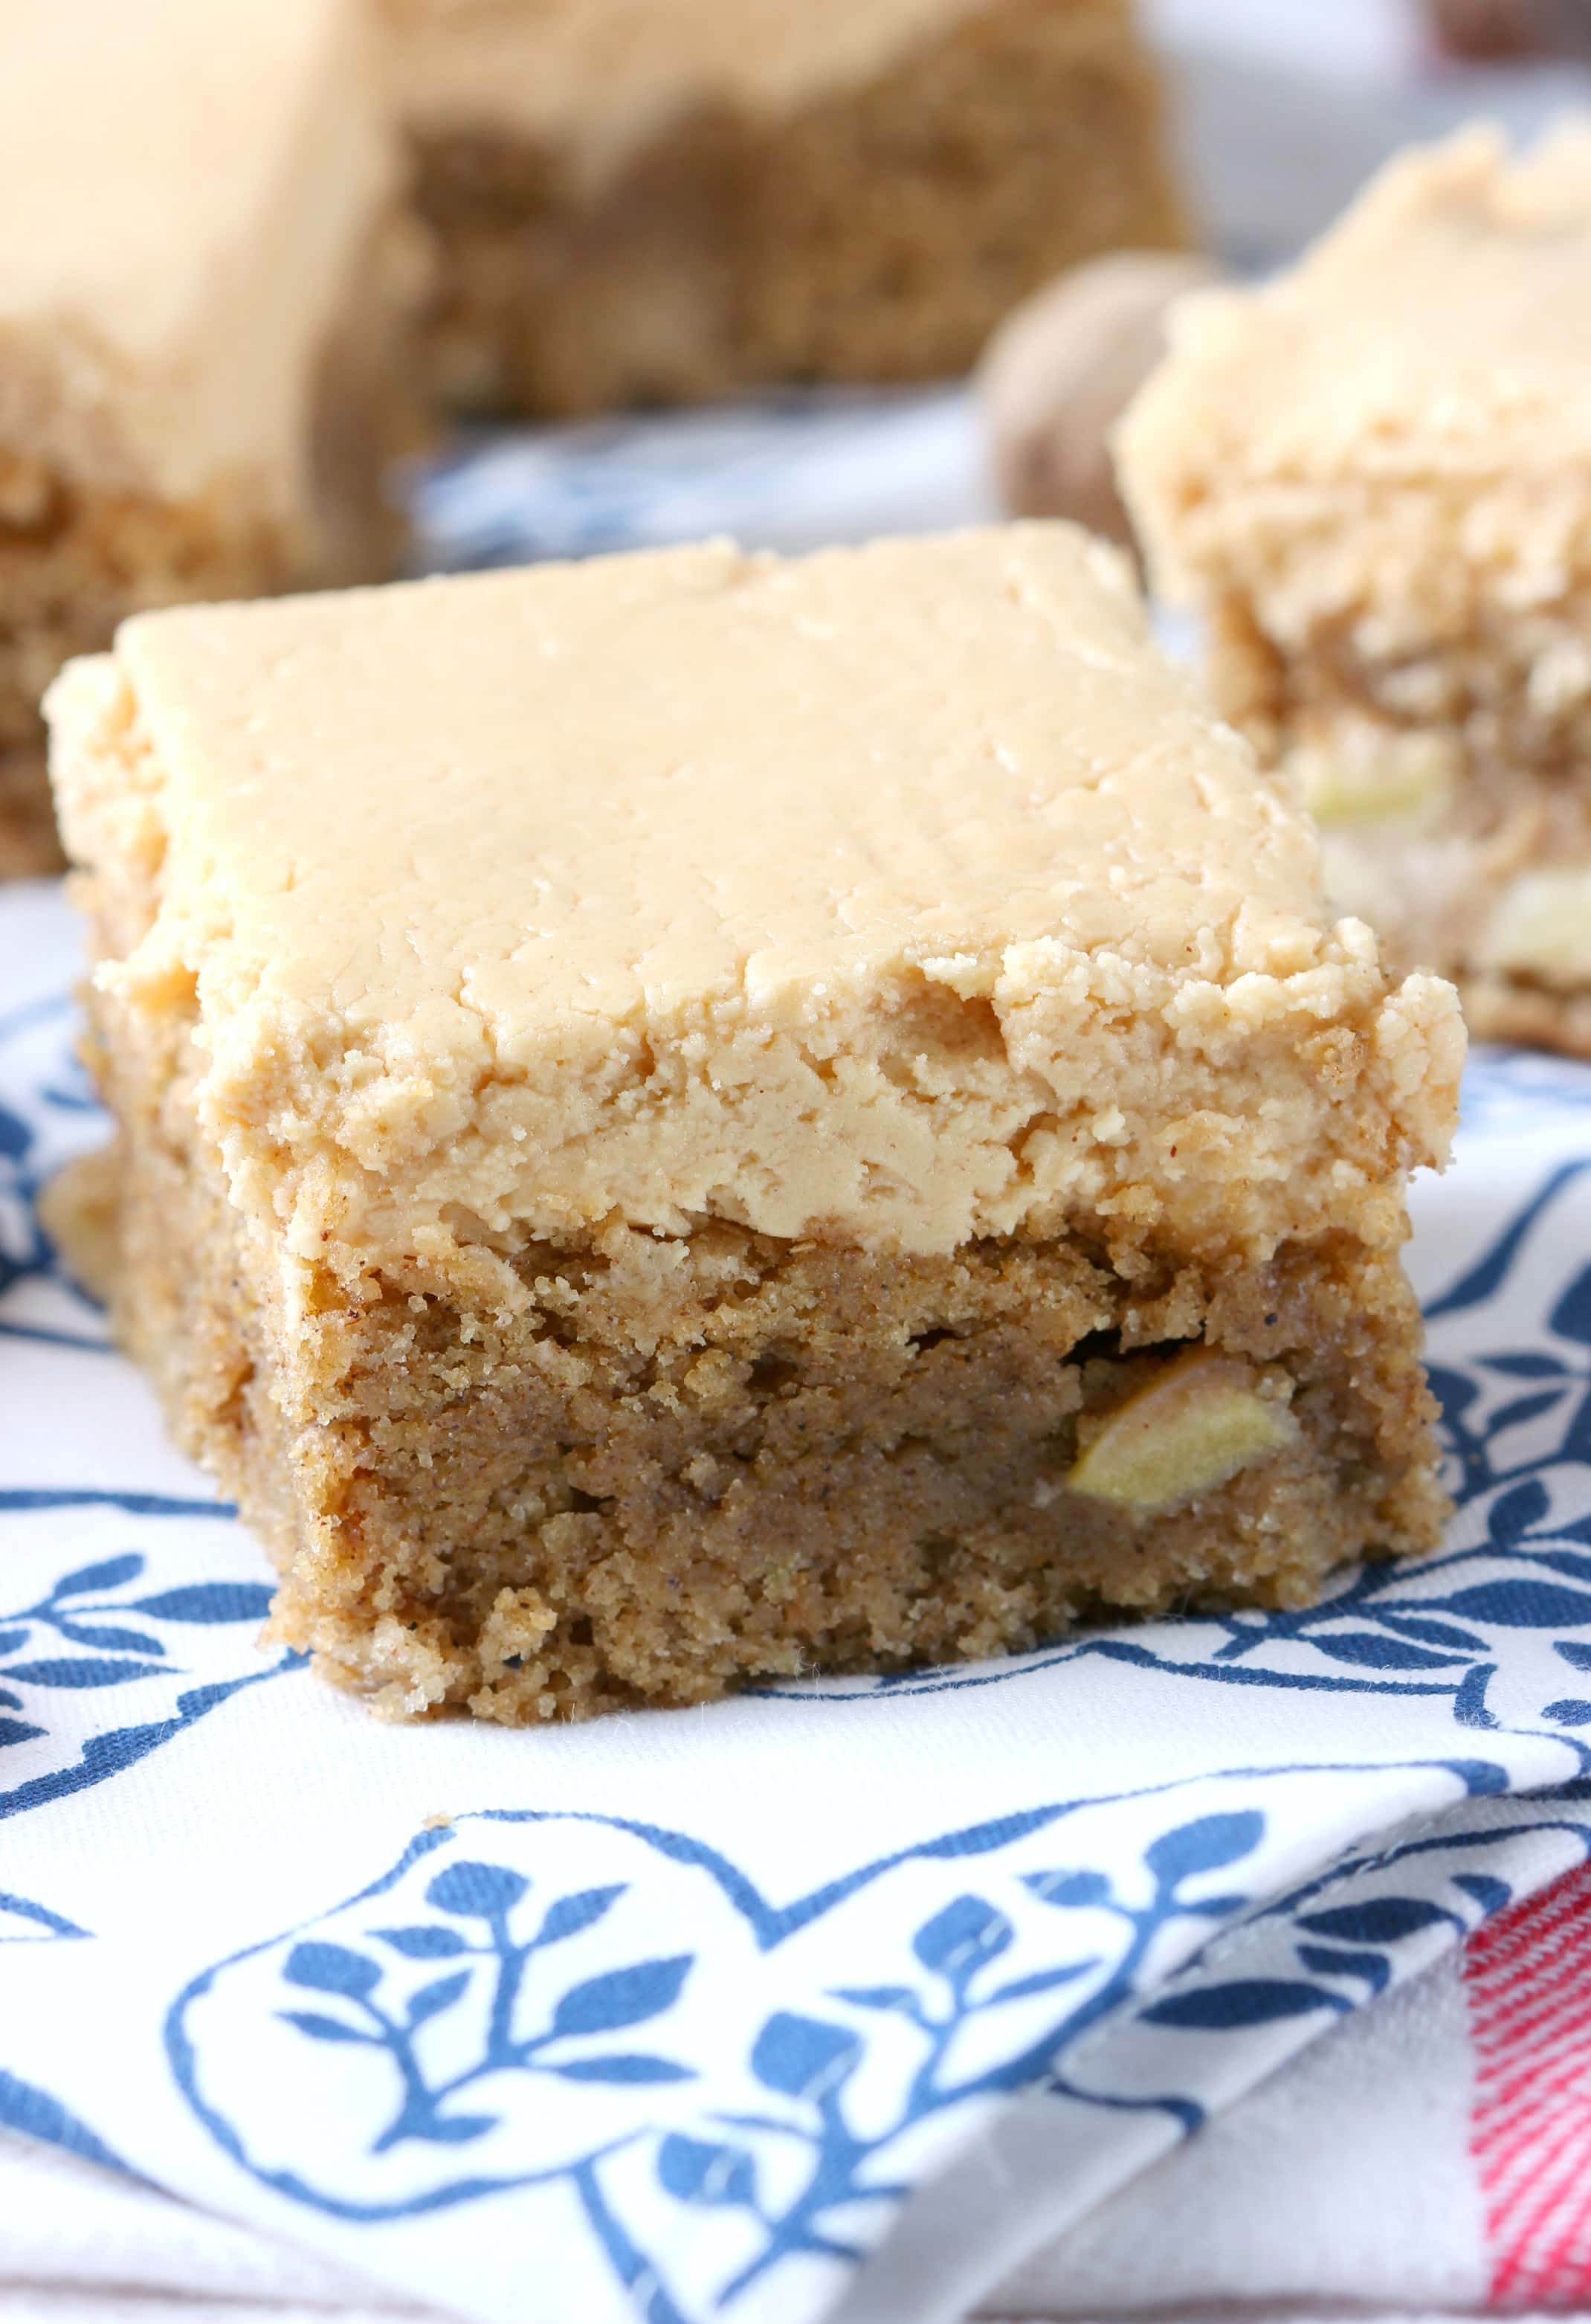 Spiced Apple Bars with Peanut Butter Frosting Recipe from A Kitchen Addiction